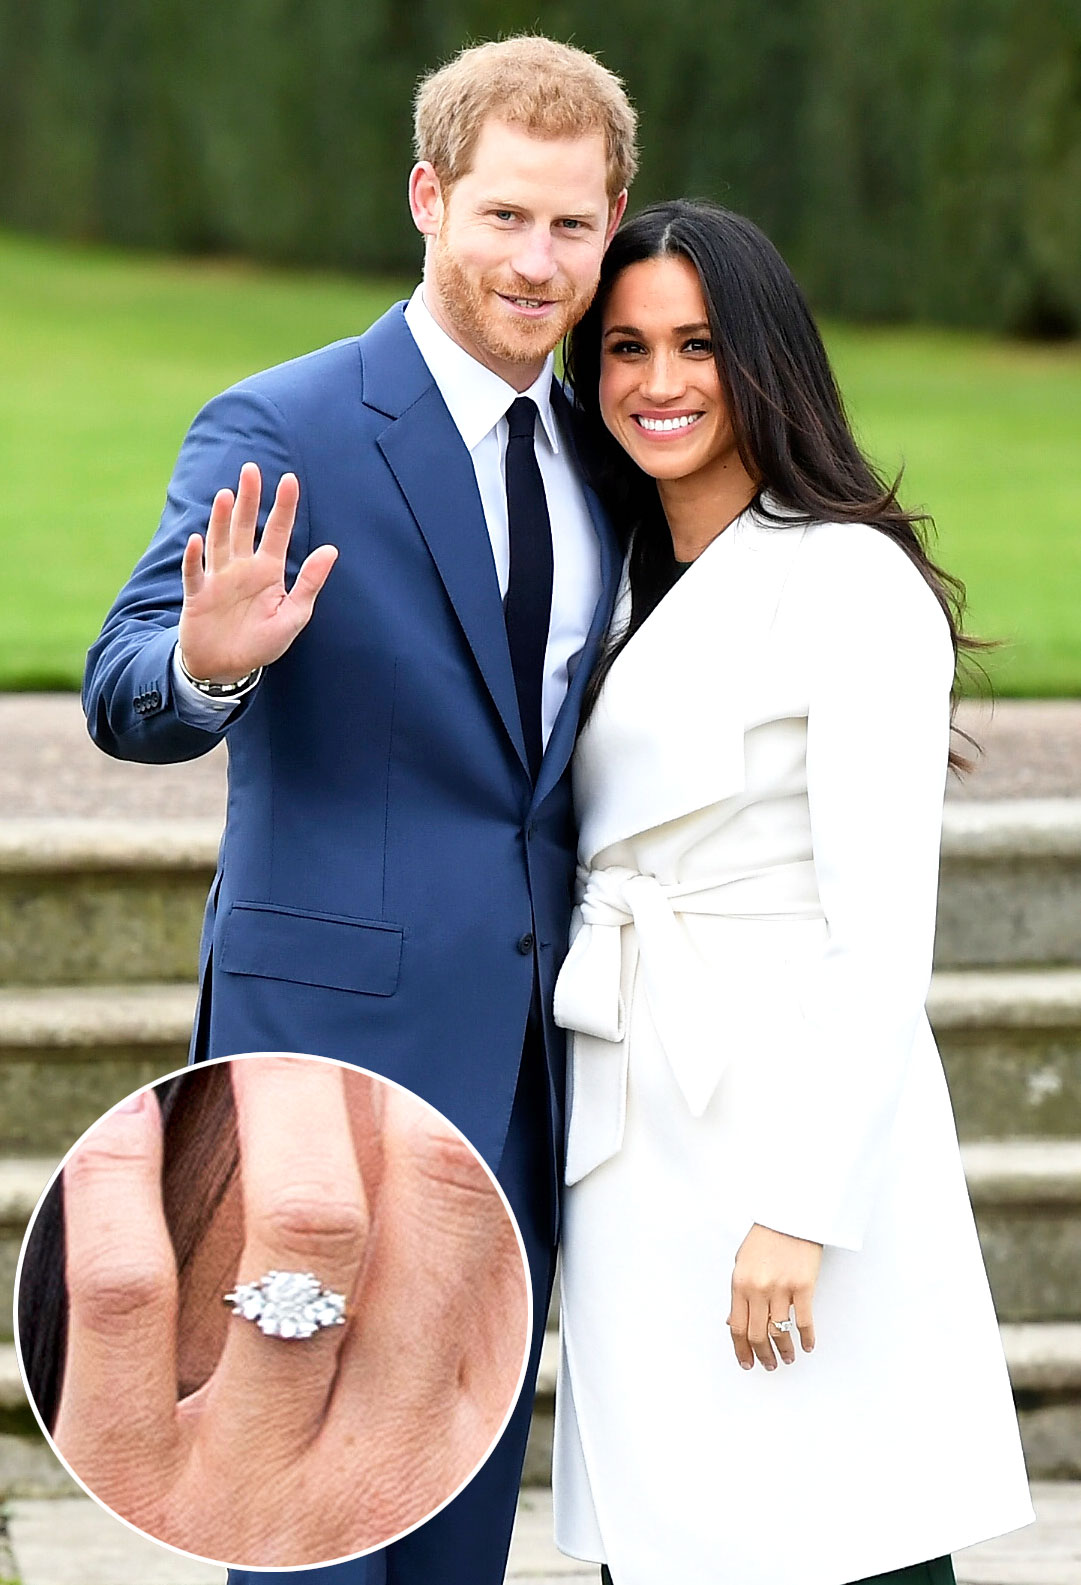 You can buy a $40 replica of Meghan Markle's engagement ringHelloGiggles